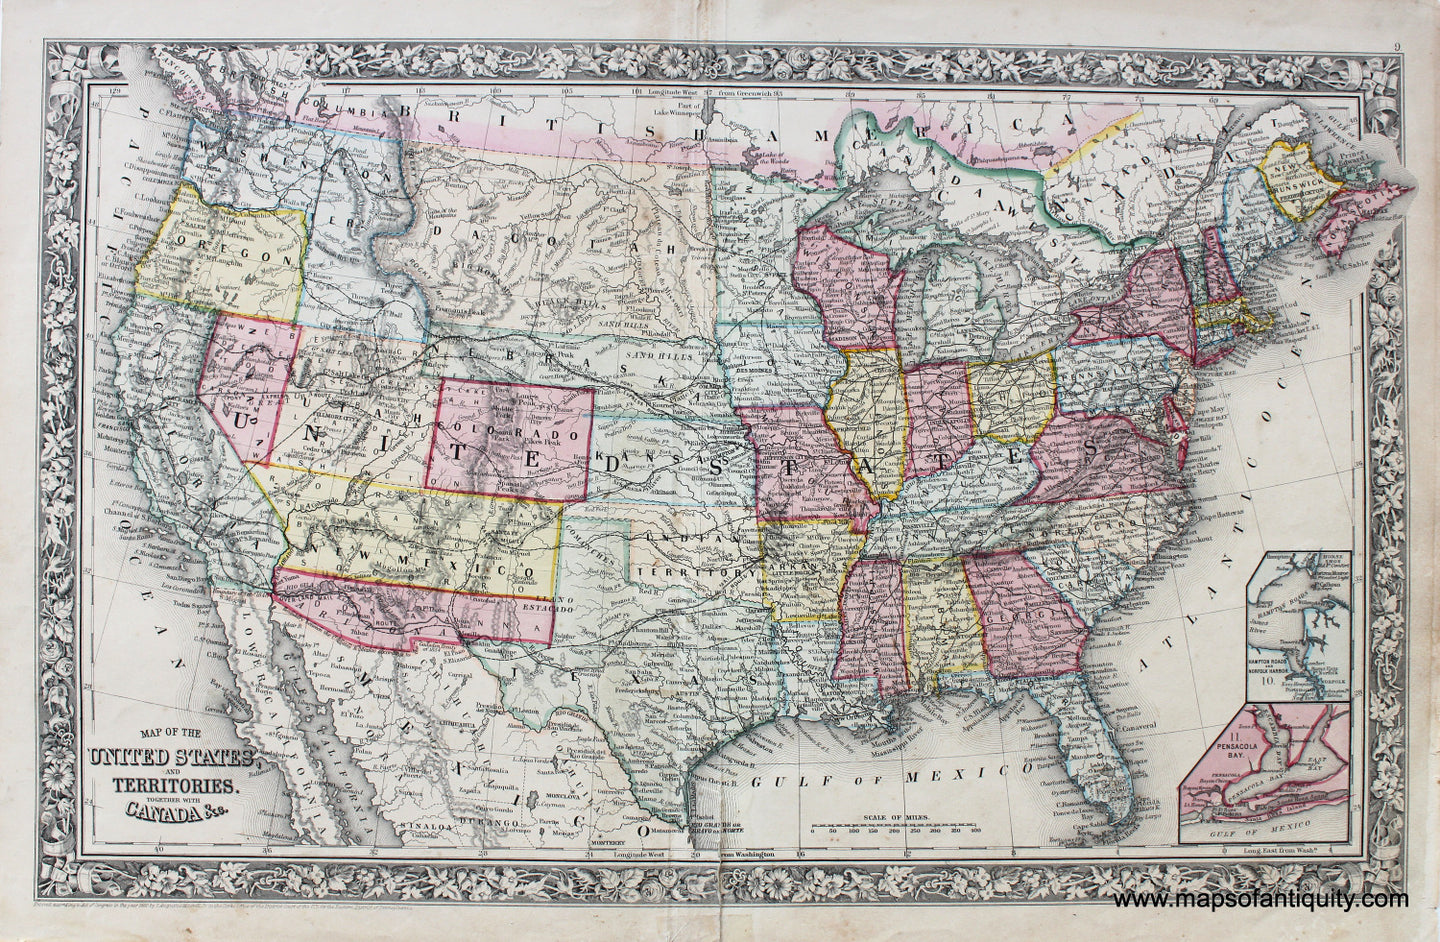 Antique-Hand-Colored-Map-Map-of-the-United-States-and-Territories.-Together-with-Canada-etc.--United-States-United-States-General---1861-Mitchell-Maps-Of-Antiquity